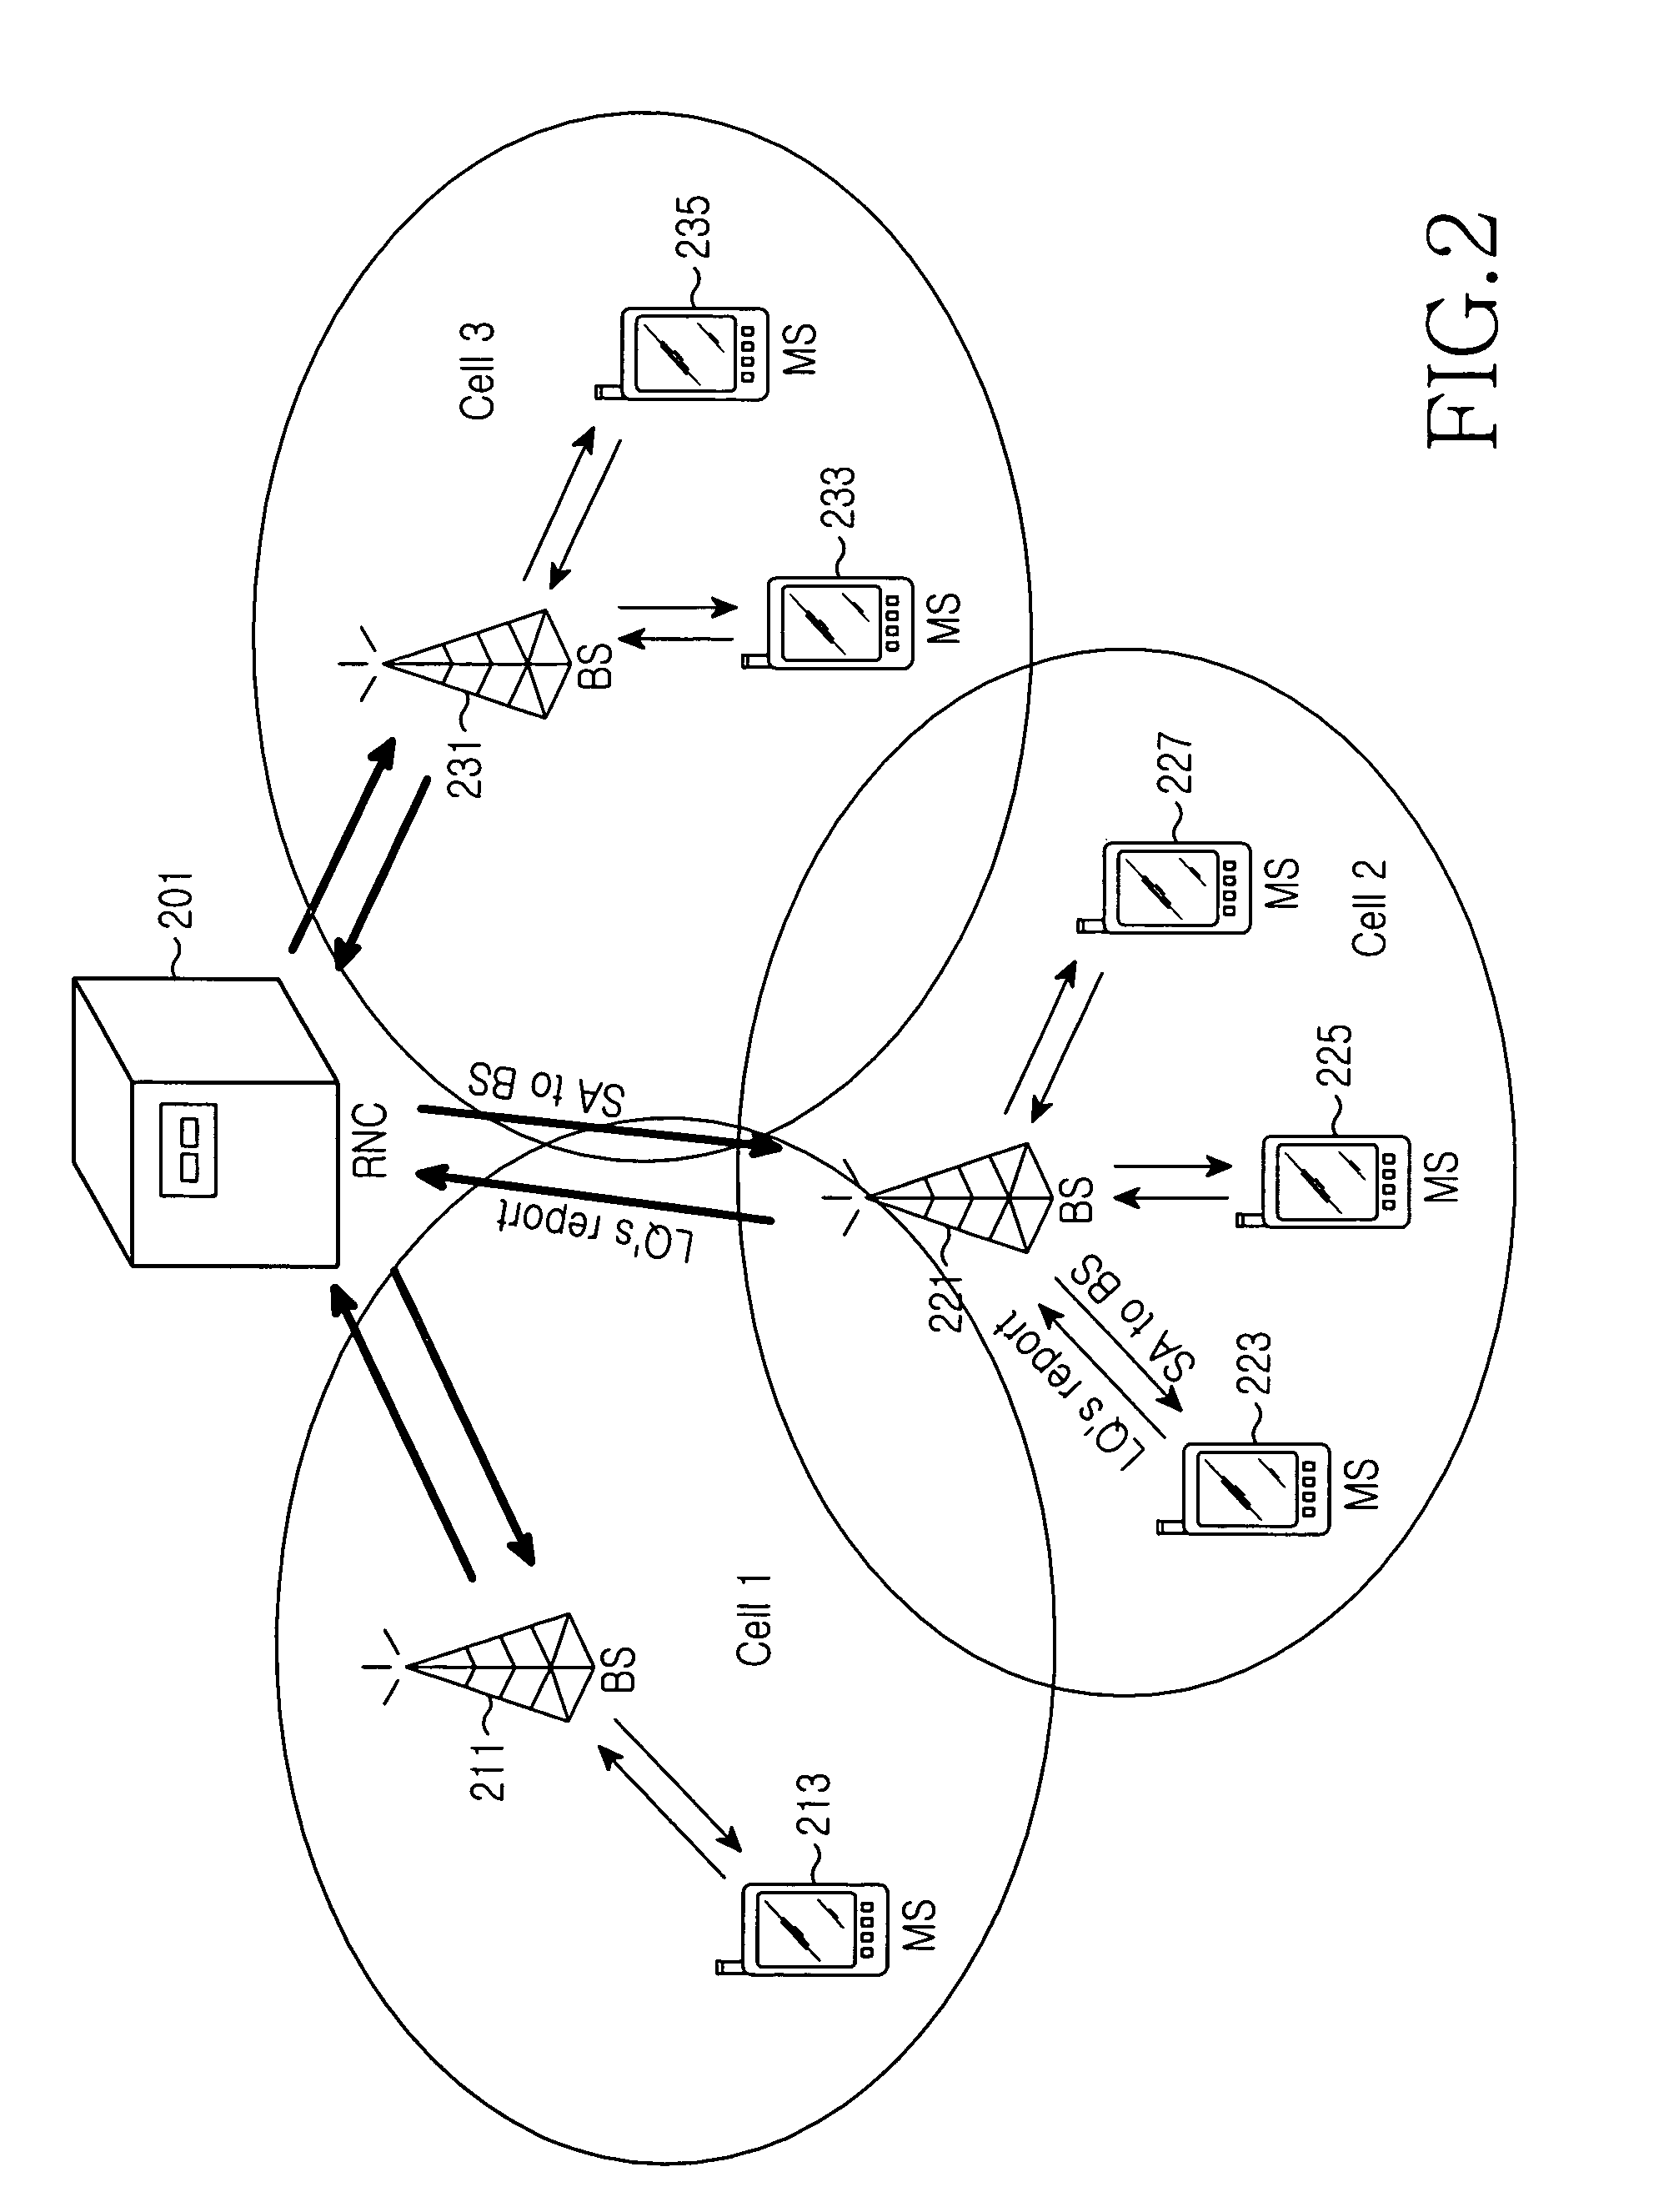 Apparatus and method for allocating subchannels adaptively according to frequency reuse rates in an orthogonal frequency division multiple access system